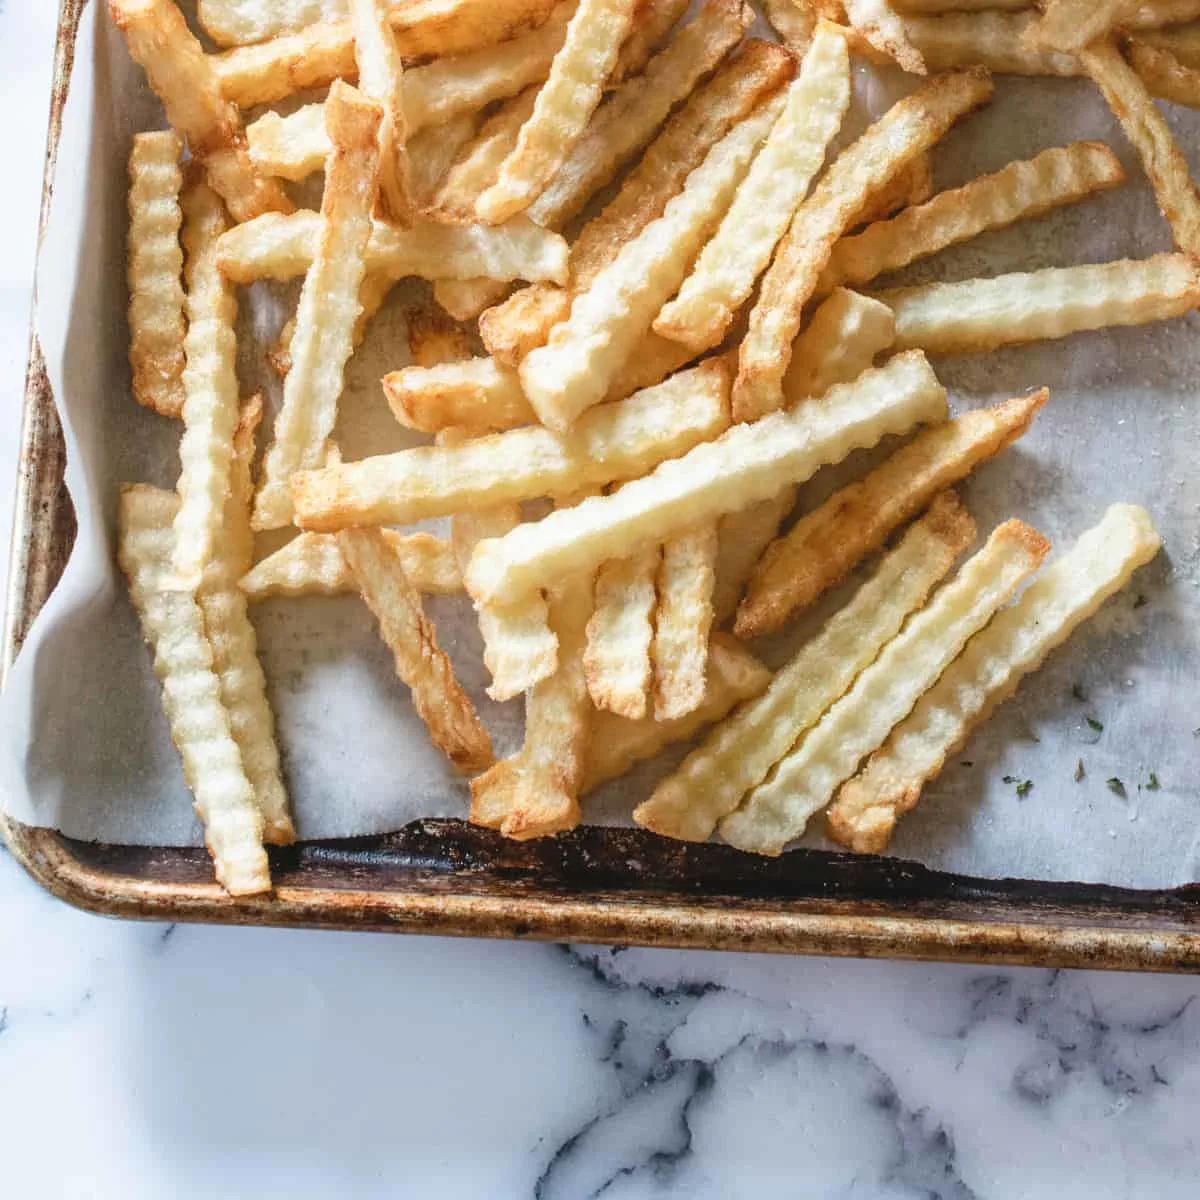 Crinkle cut fries on a baking sheet with salt.